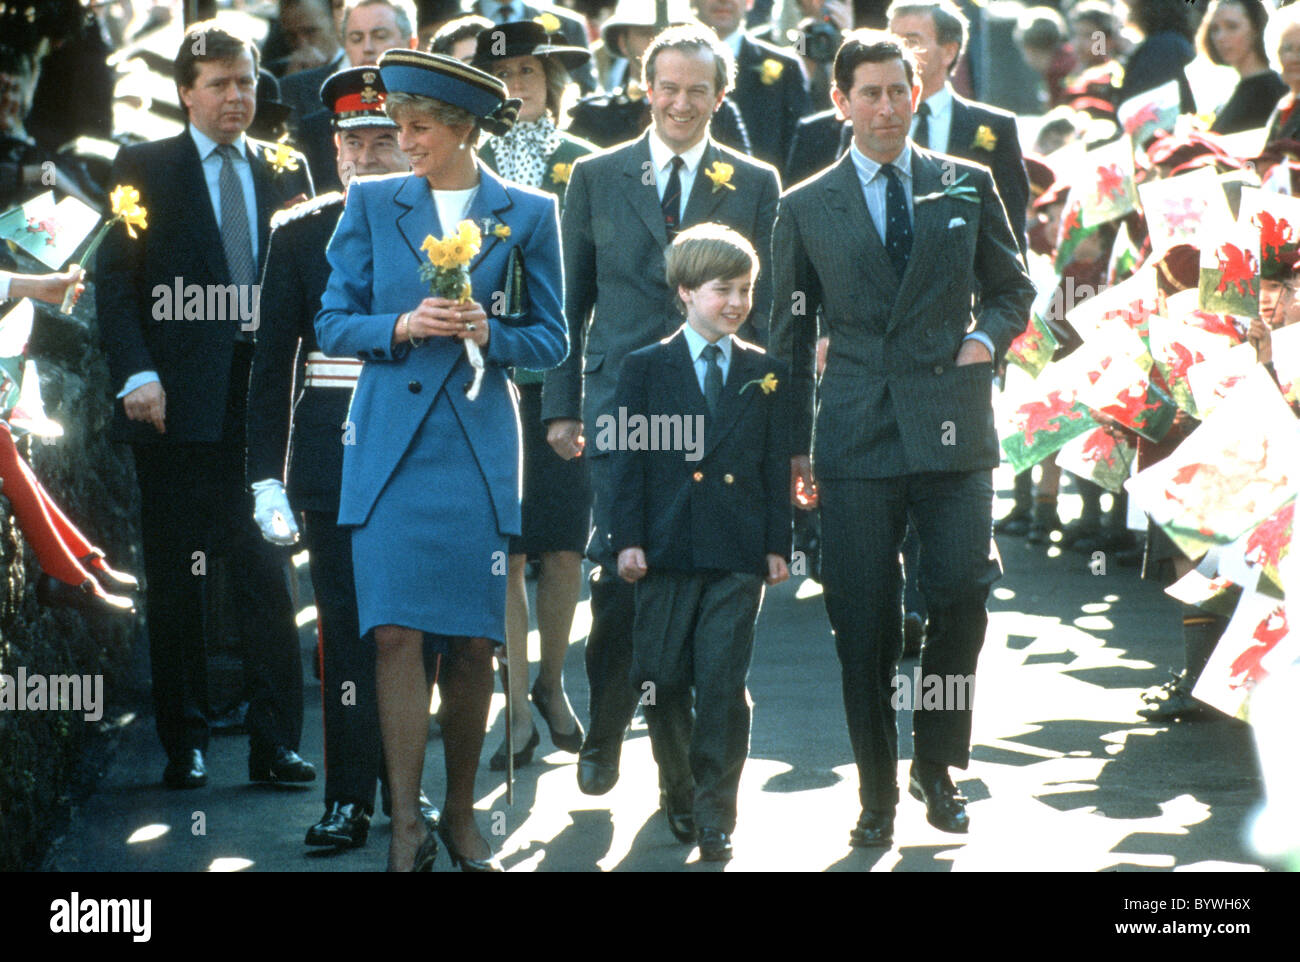 HRH Duke of Cambridge with his mother and father TRH Prince and Princess of Wales in St David's Wales. Stock Photo